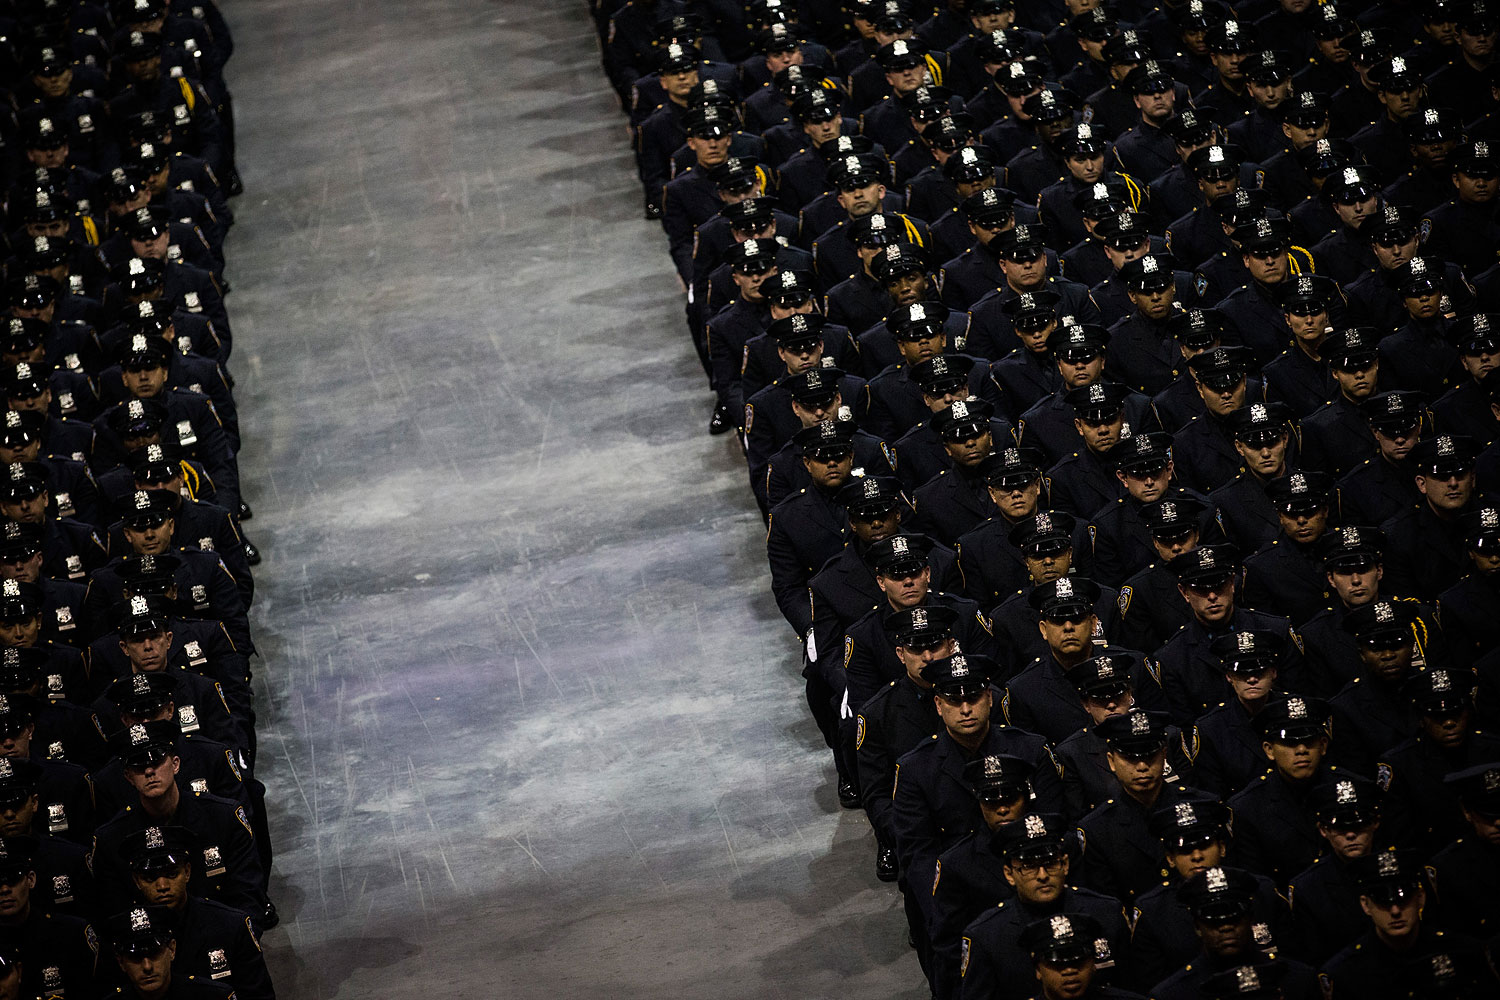 July 2, 2013. City Police Academy cadets attend their graduation ceremony at the Barclays Center in the Brooklyn borough of New York City.